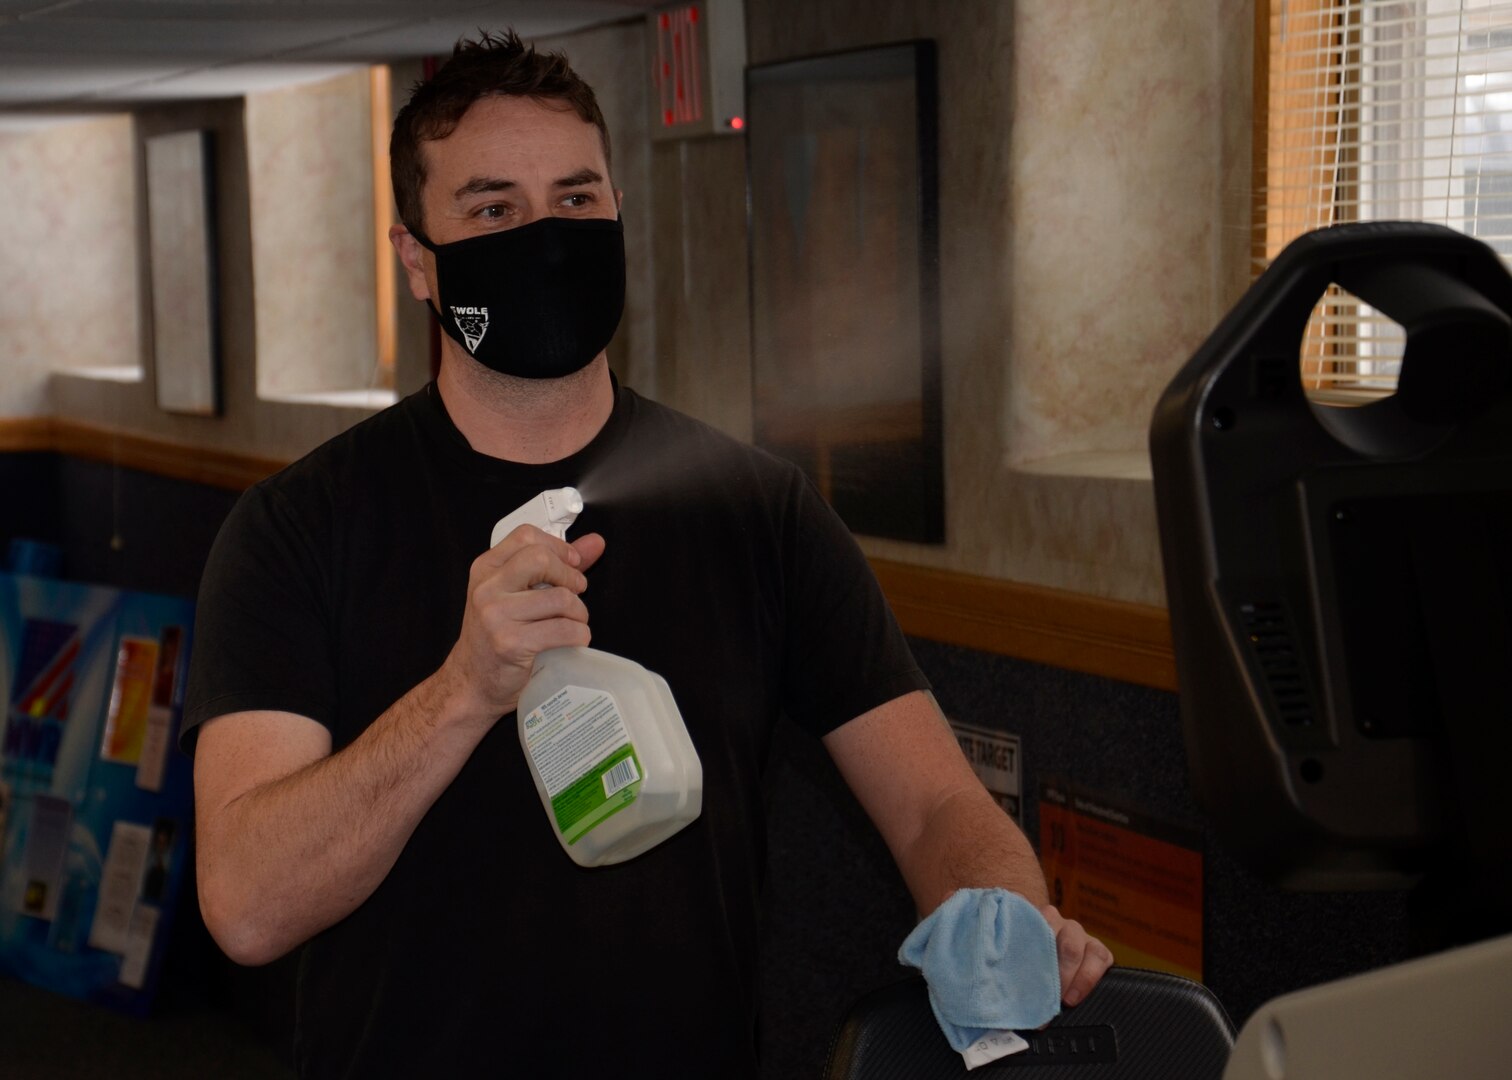 A person with a mask covering his mouth and nose sprays cleaner at fitness equipment to sanitize it for the next person.